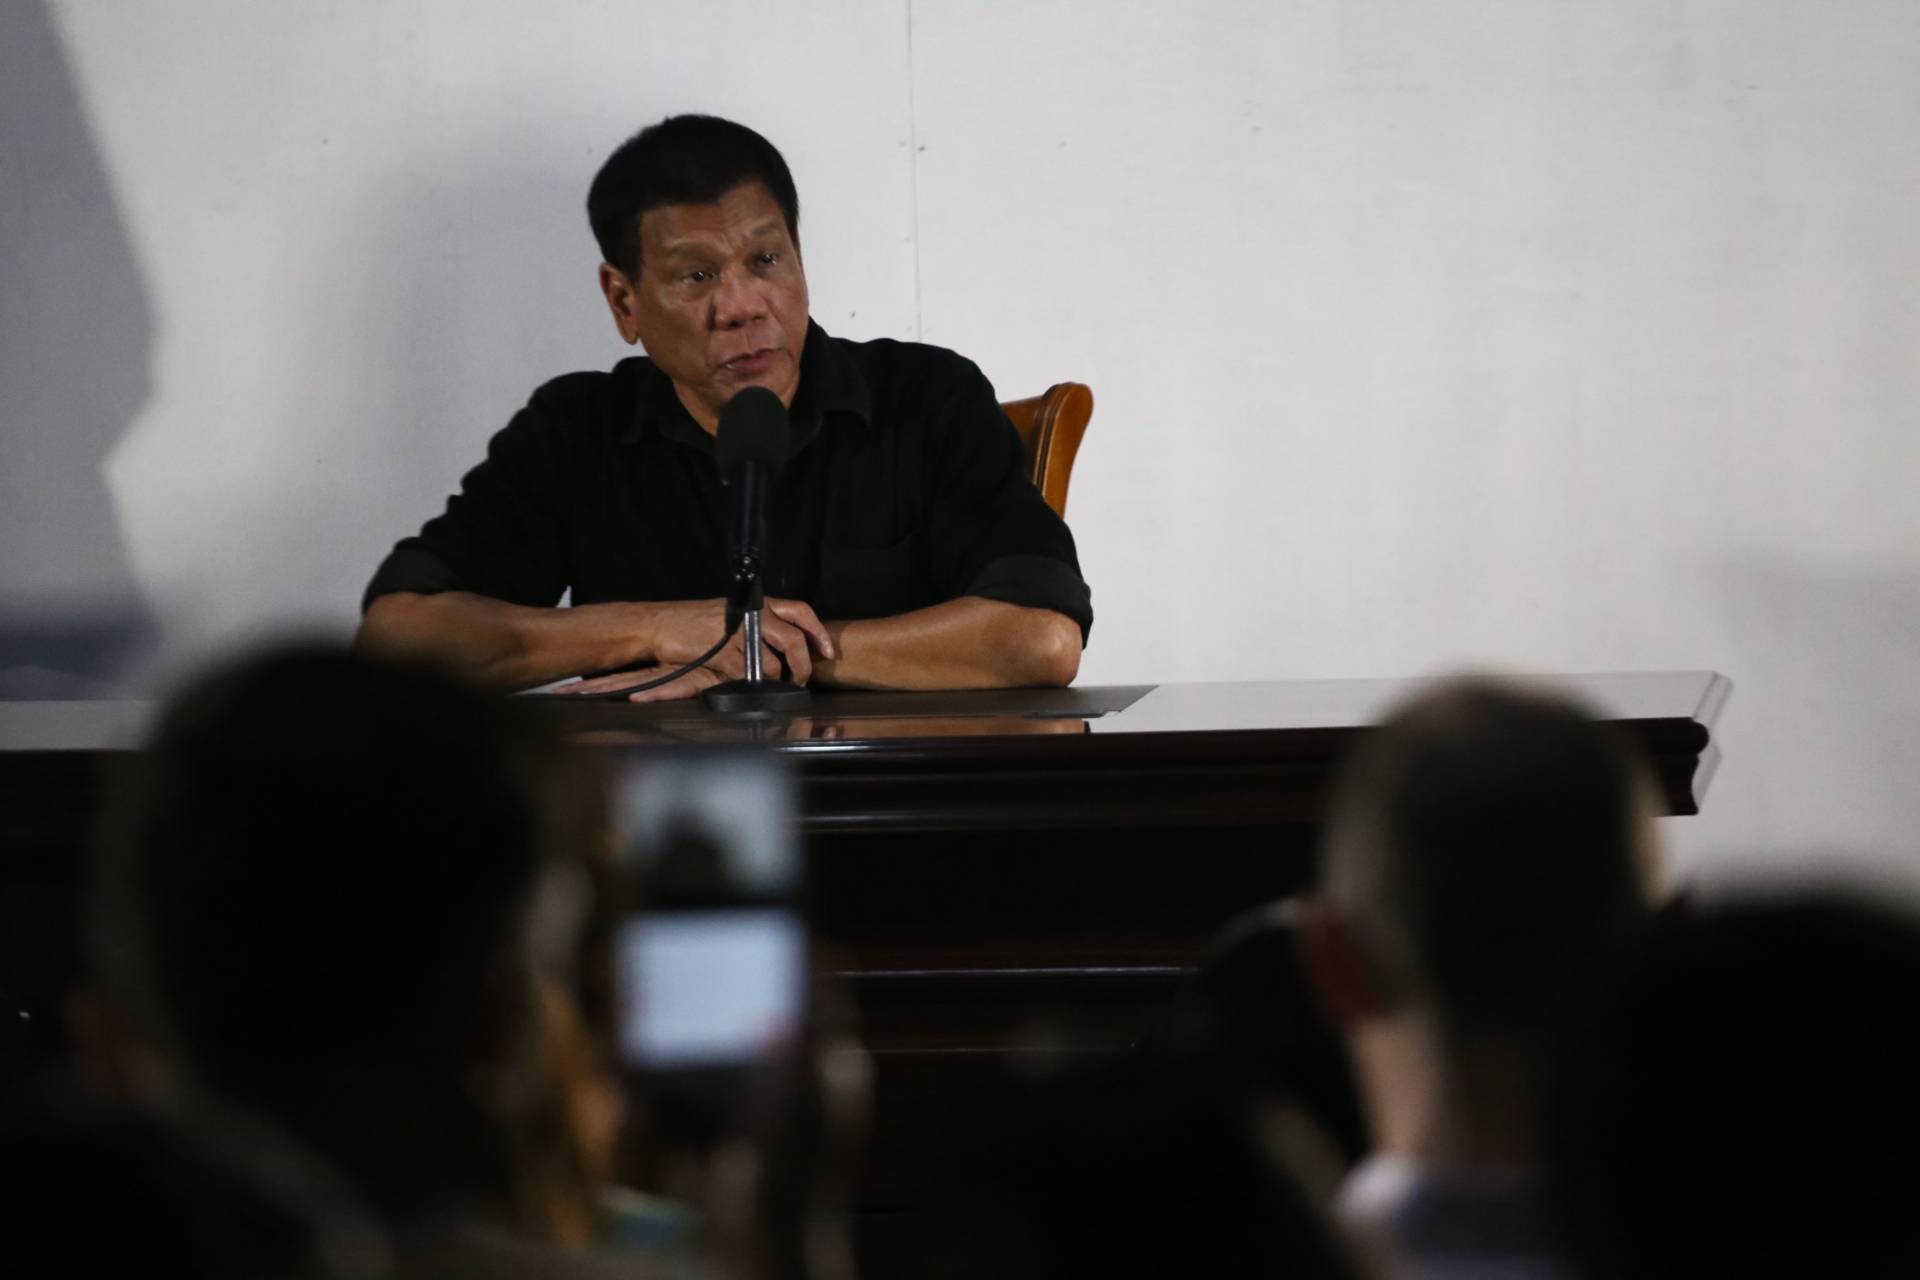 FACING THE MEDIA. Duterte holds a press conference at the Presidential Guesthouse at the DPWH Depot Compound, Panacan, Davao City. Photo by Manman Dejeto/Rappler 